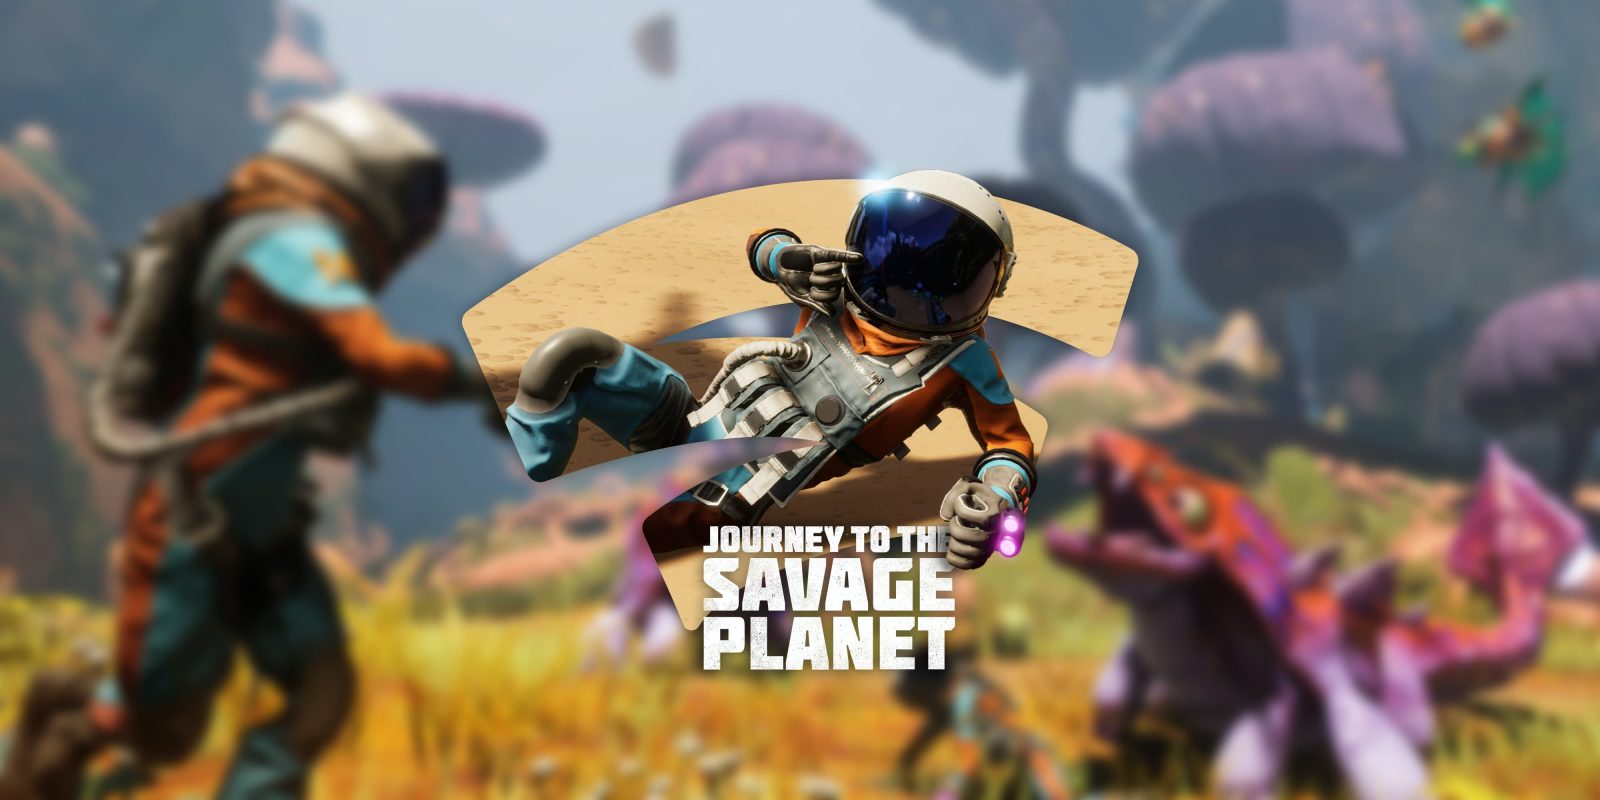 Journey to the Savage Planet for Google Stadia